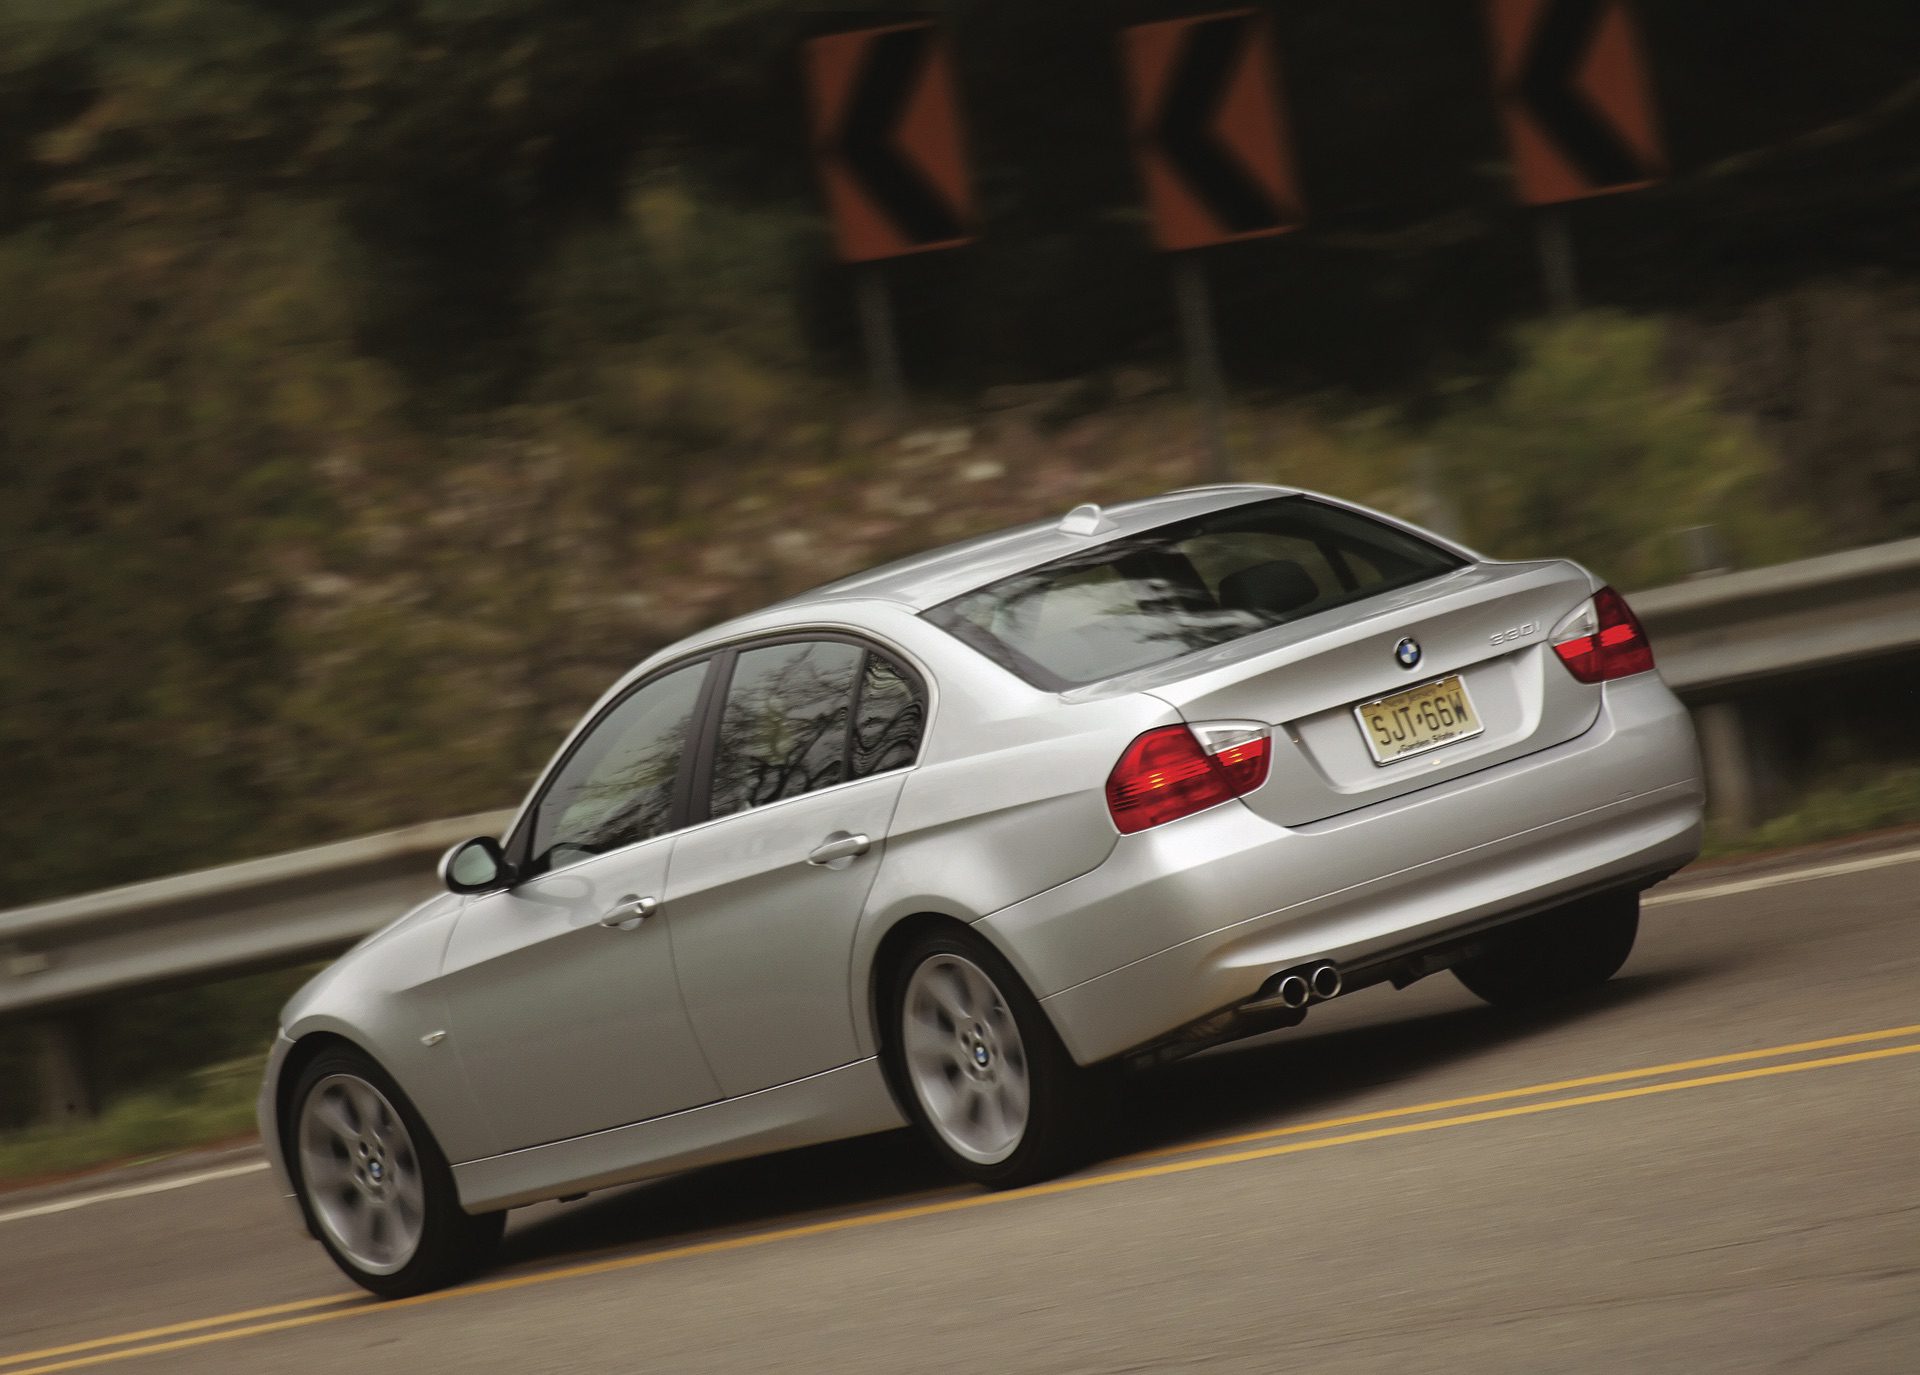 The E90 3 Series is a Better Daily Driver Than the E46